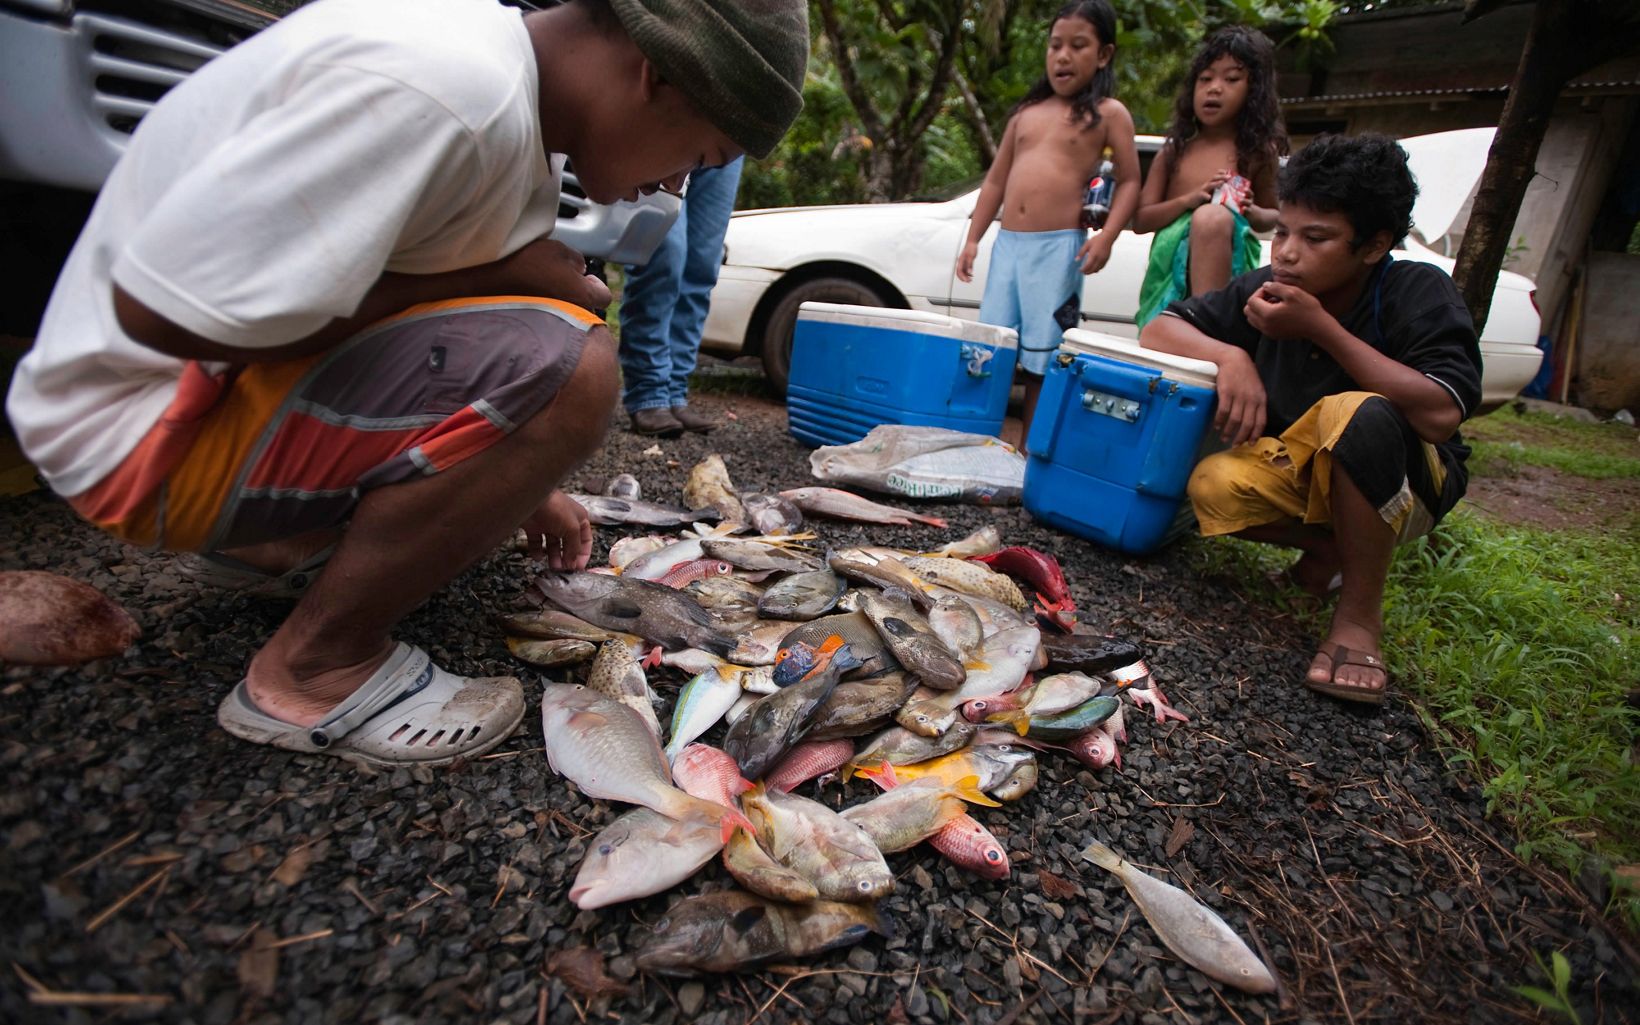 Members of the Paulino family examine their catch some of which they will sell to other members of their village community.